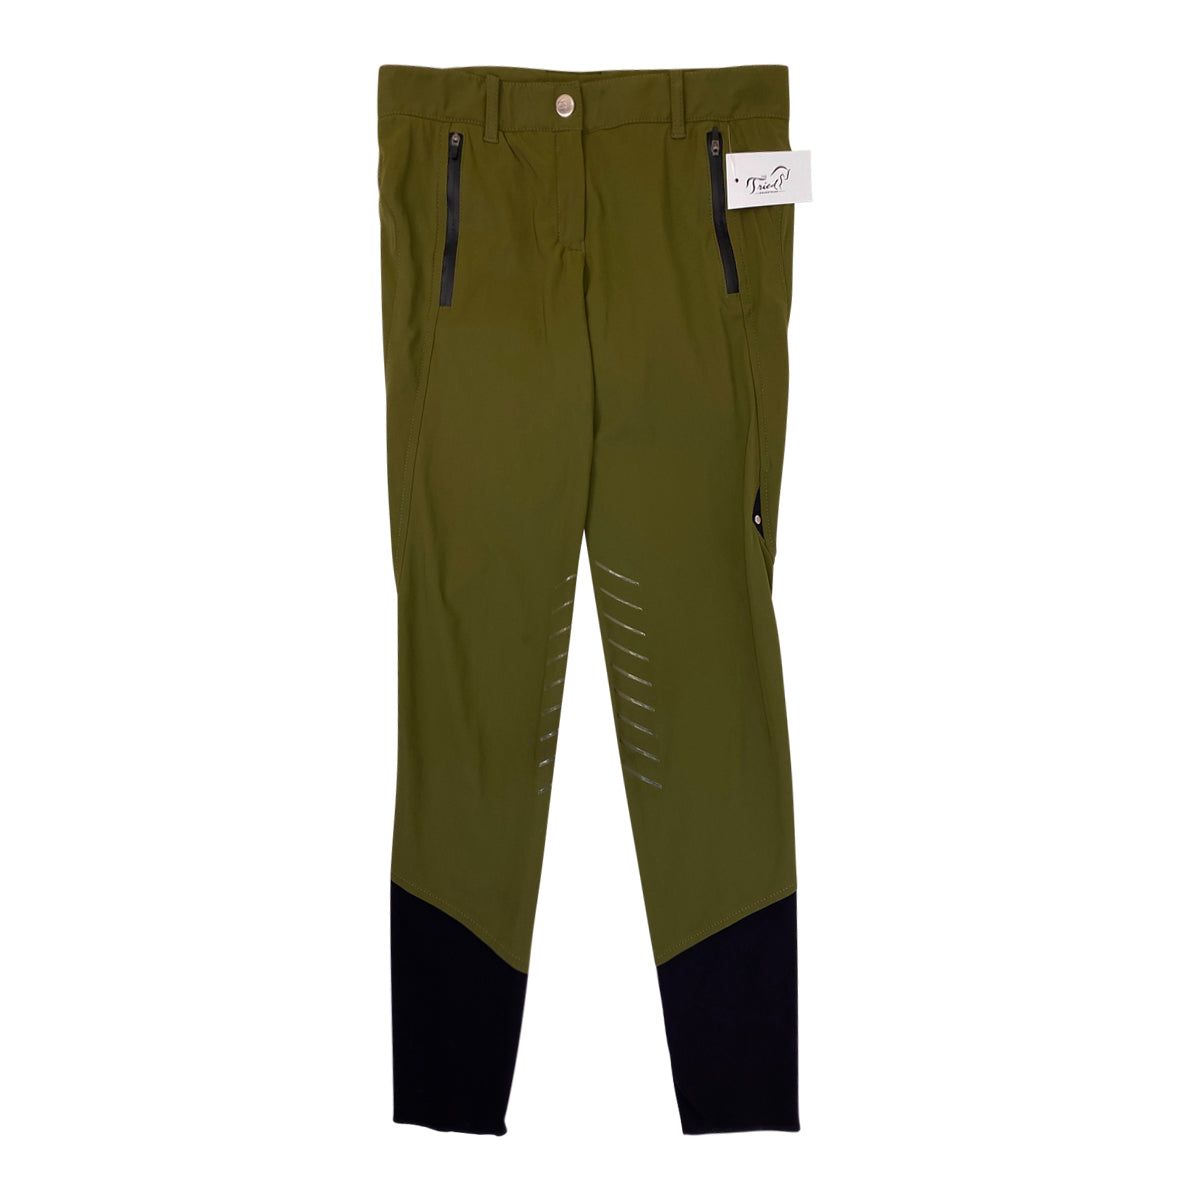 Equiline 'Notirf' Knee Grip Breeches in Olive